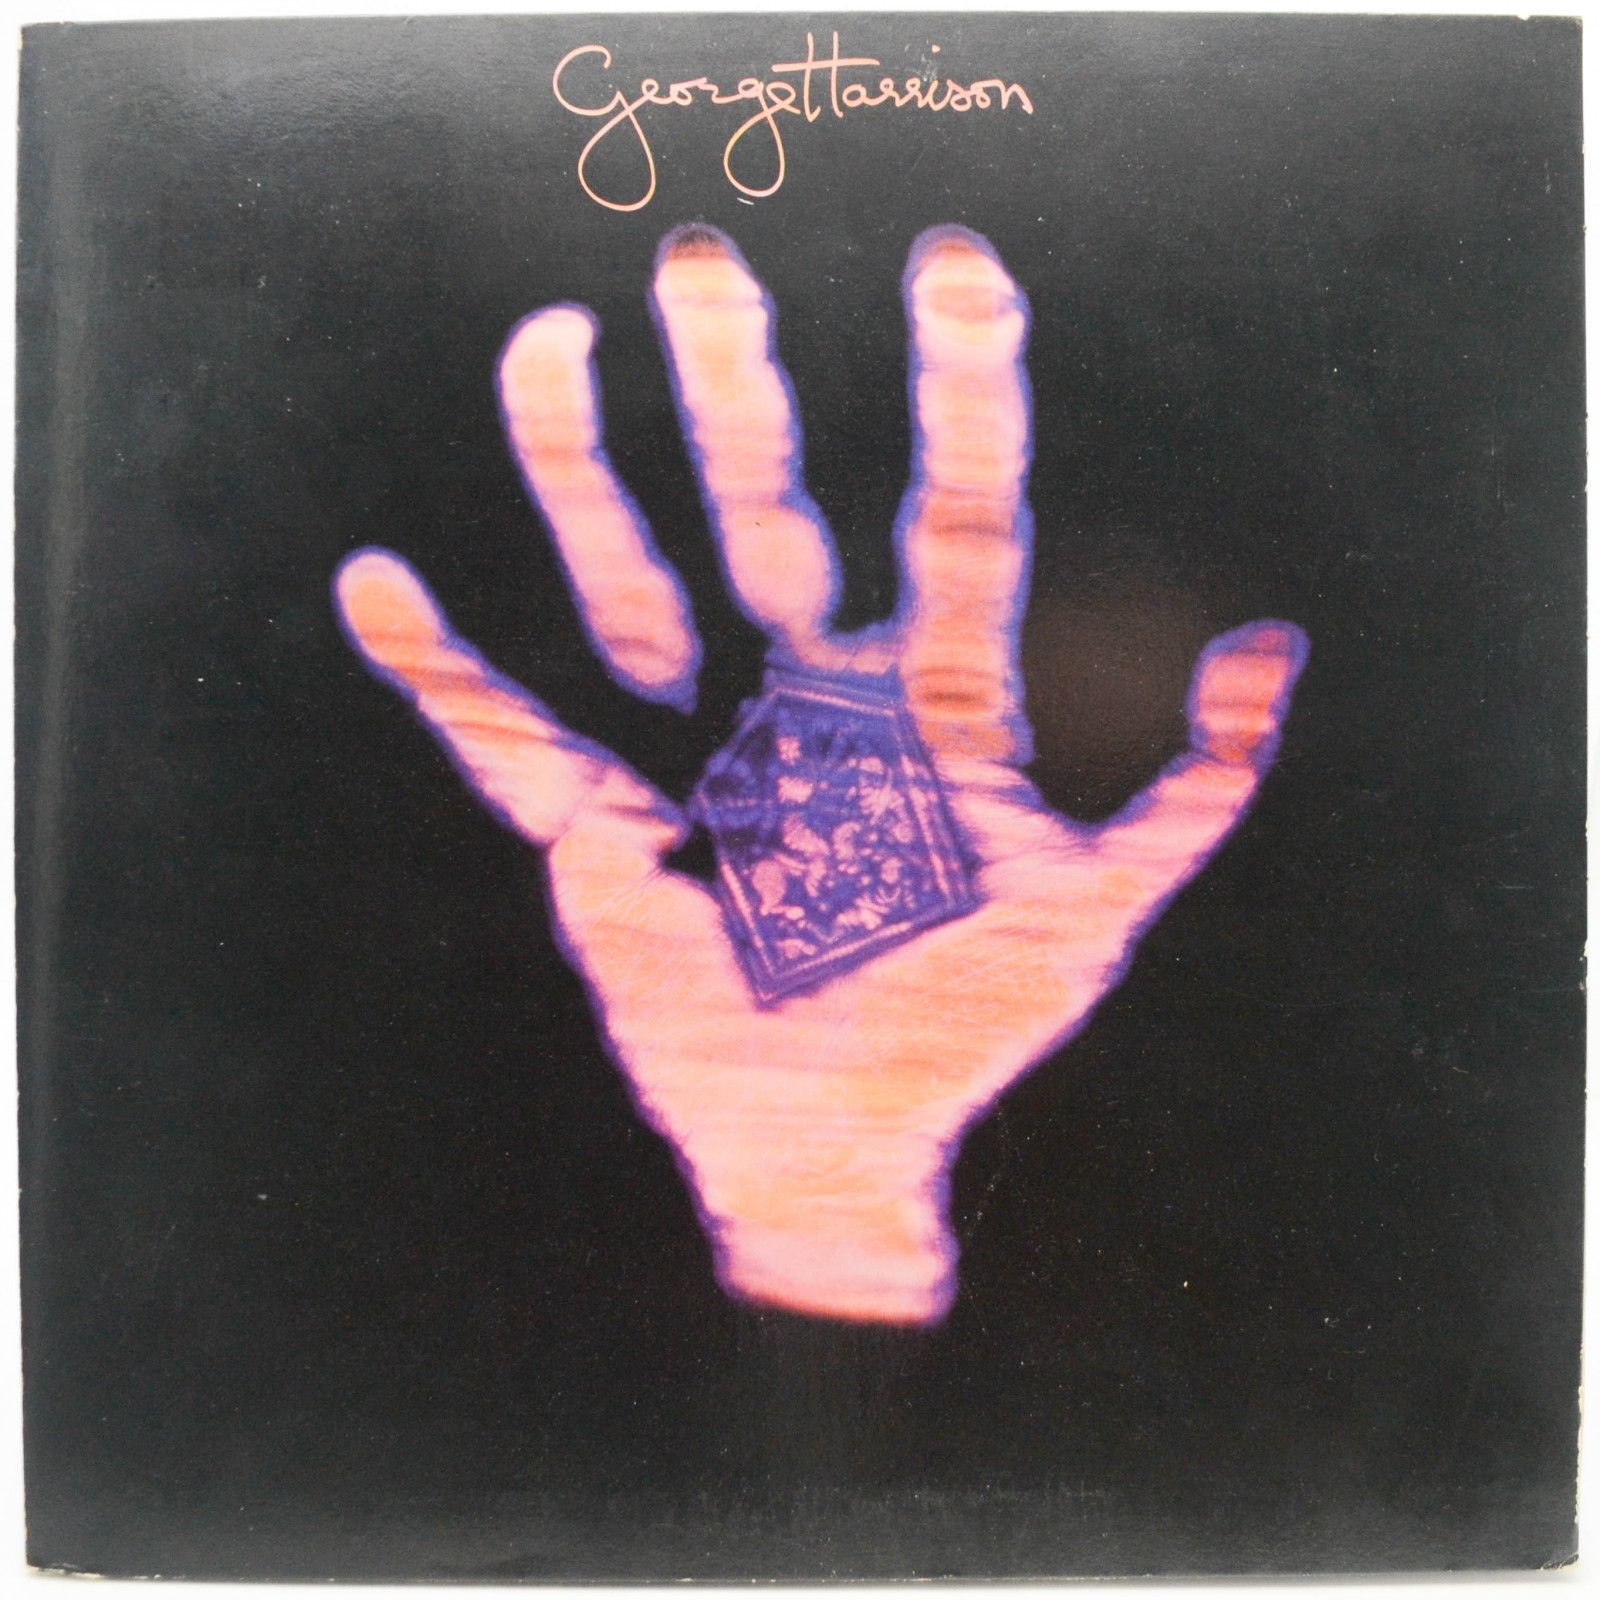 George Harrison — Living In The Material World (USA), 1973